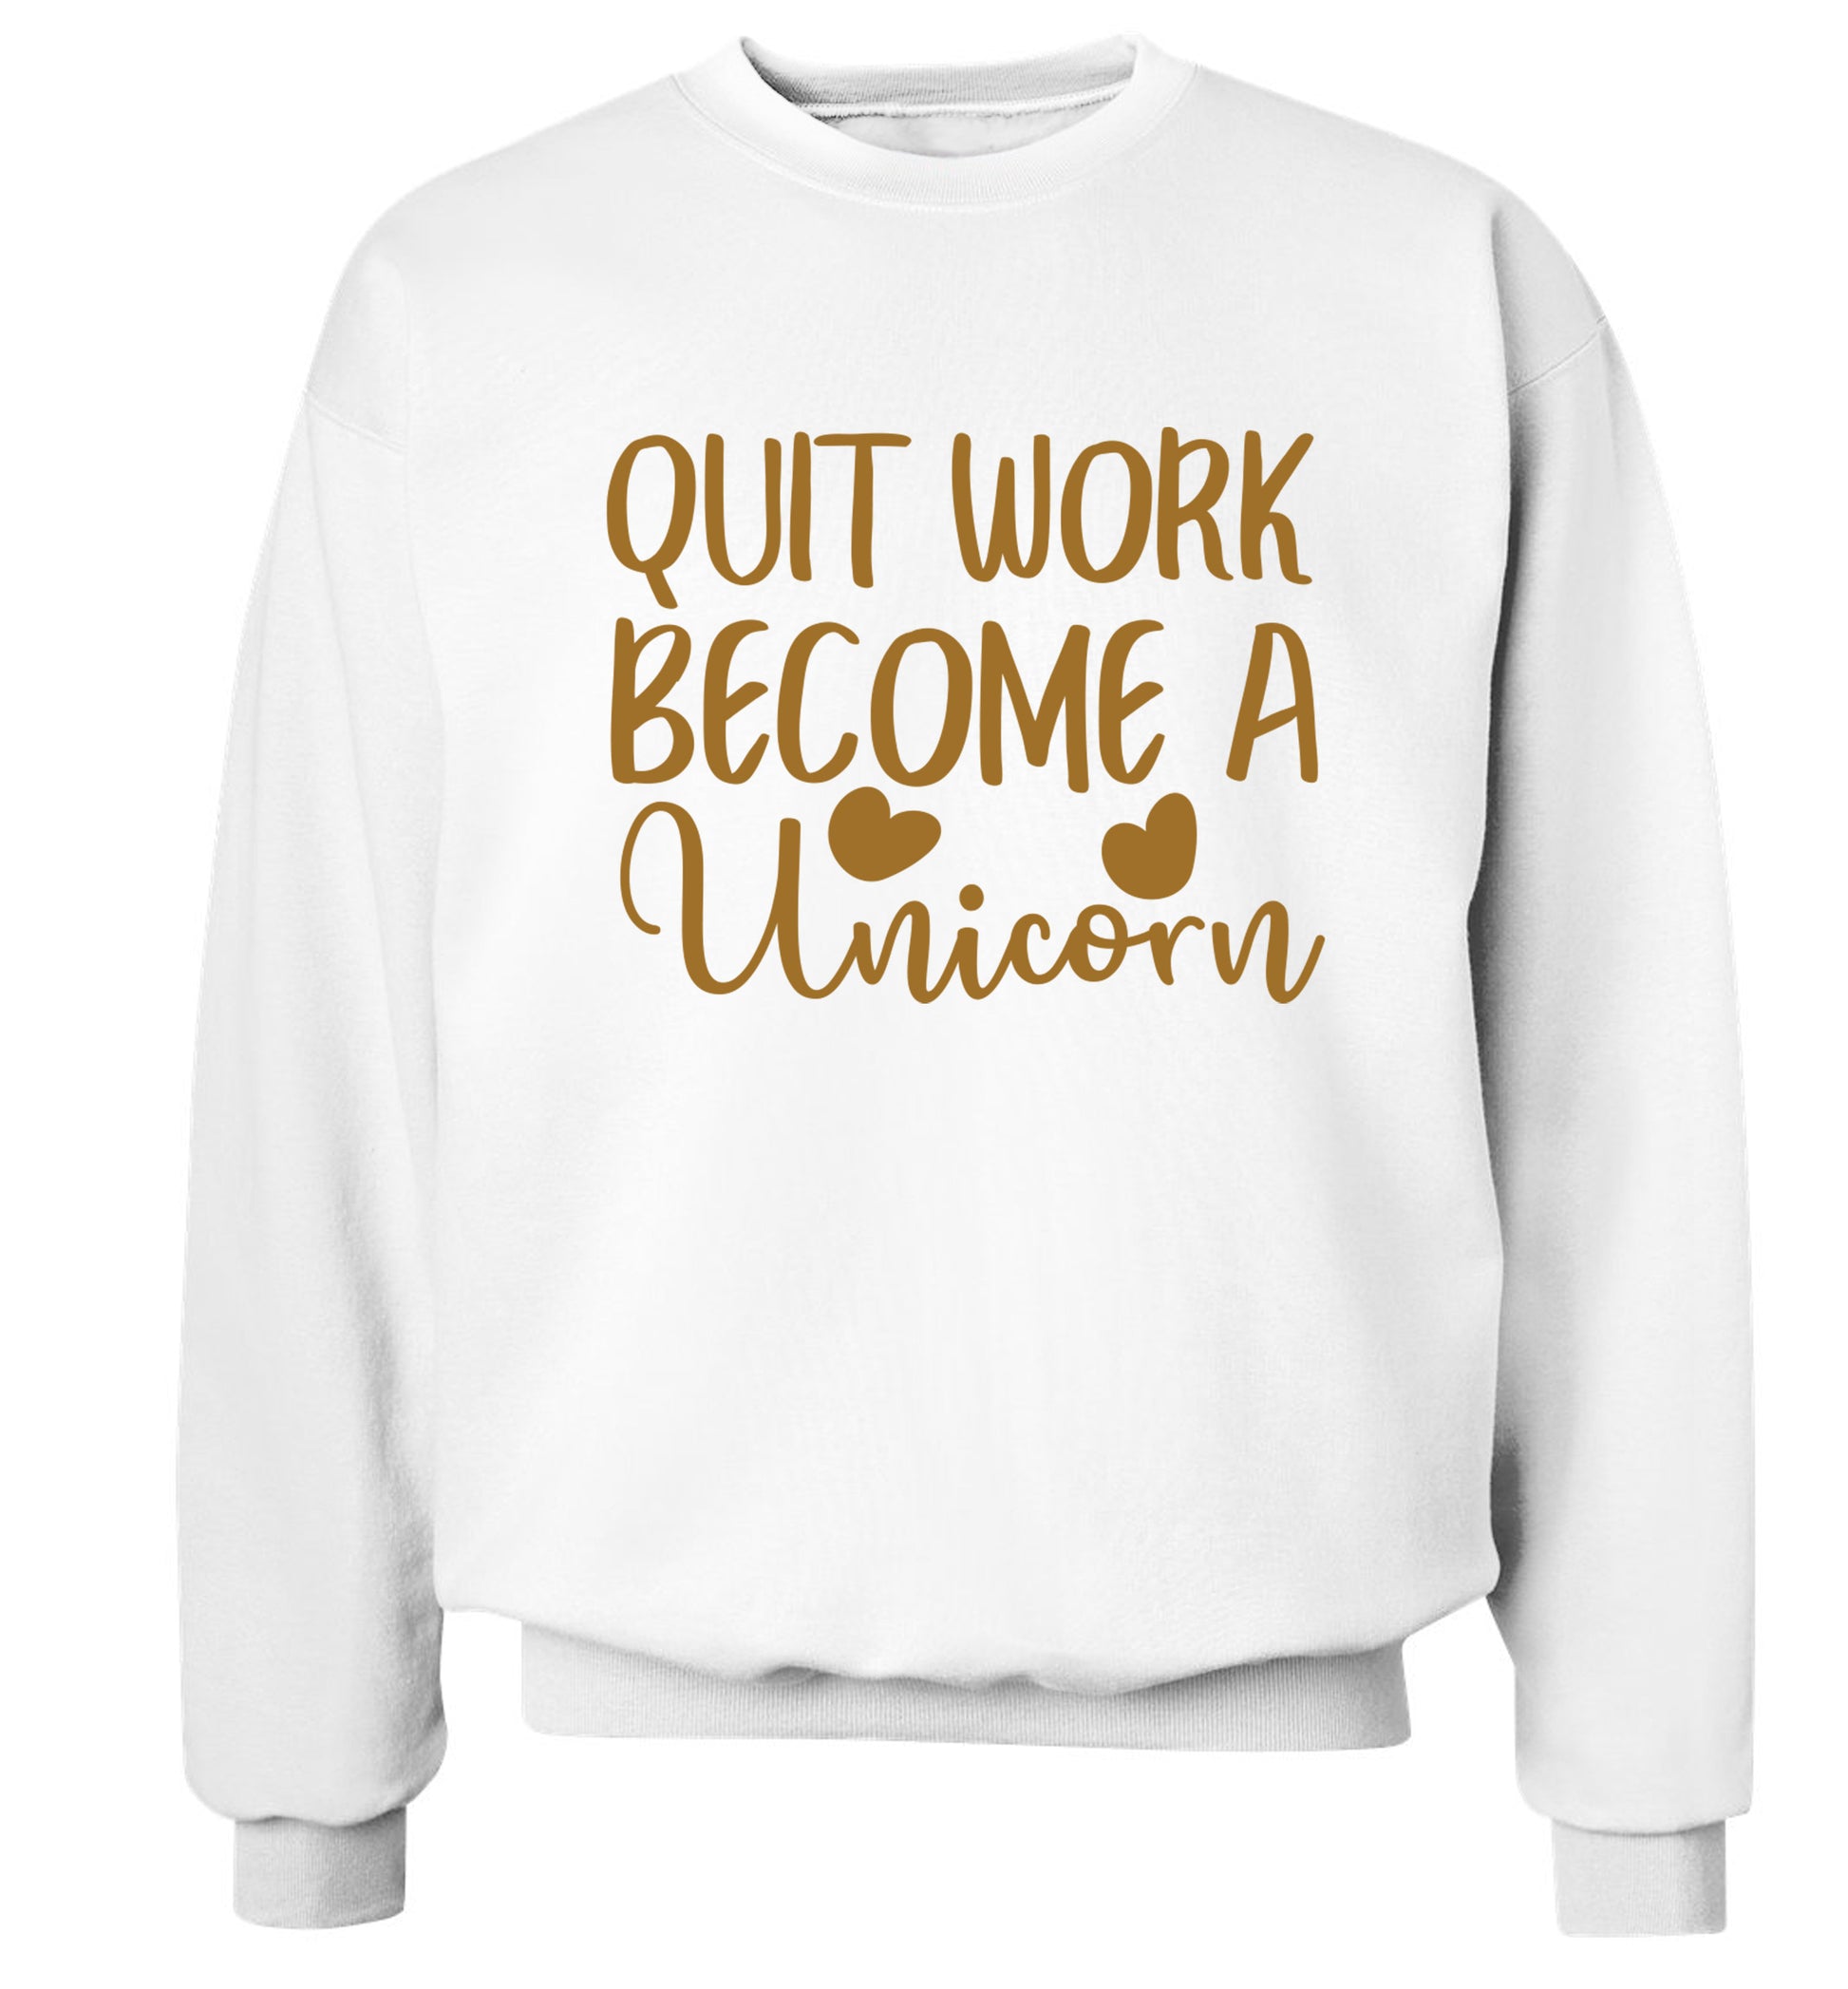 Quit work become a unicorn Adult's unisex white Sweater 2XL